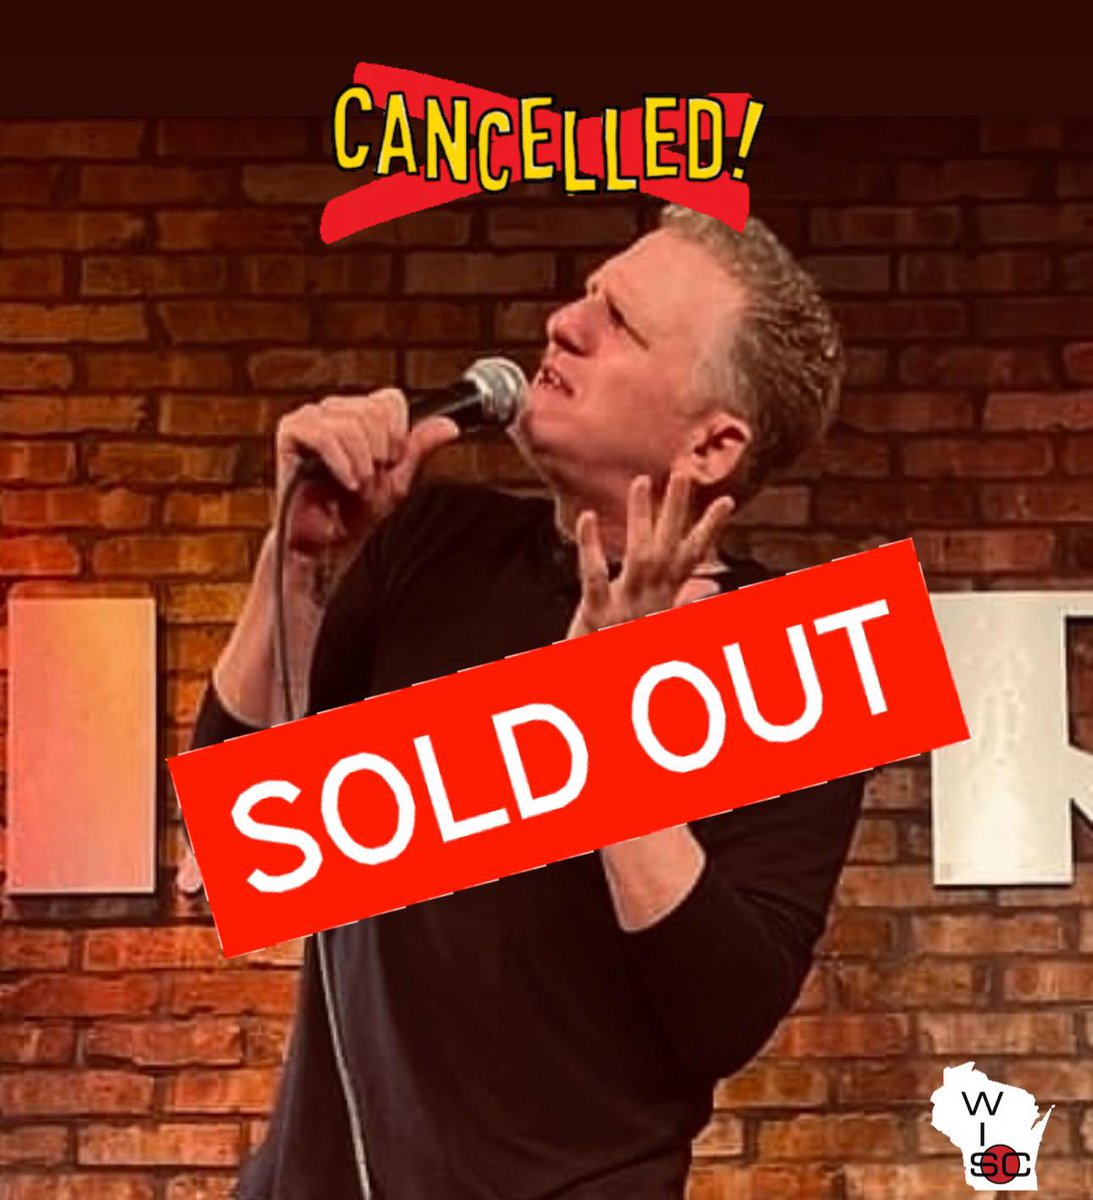 #BREAKING Madison bows to bullies. @MichaelRapaport’s sold out comedy shows in Madison, Wisconsin have been cancelled following threats from the pro-terror mob. The mob is screaming about the right to free speech, and here they are trying to silence a comedian just because he